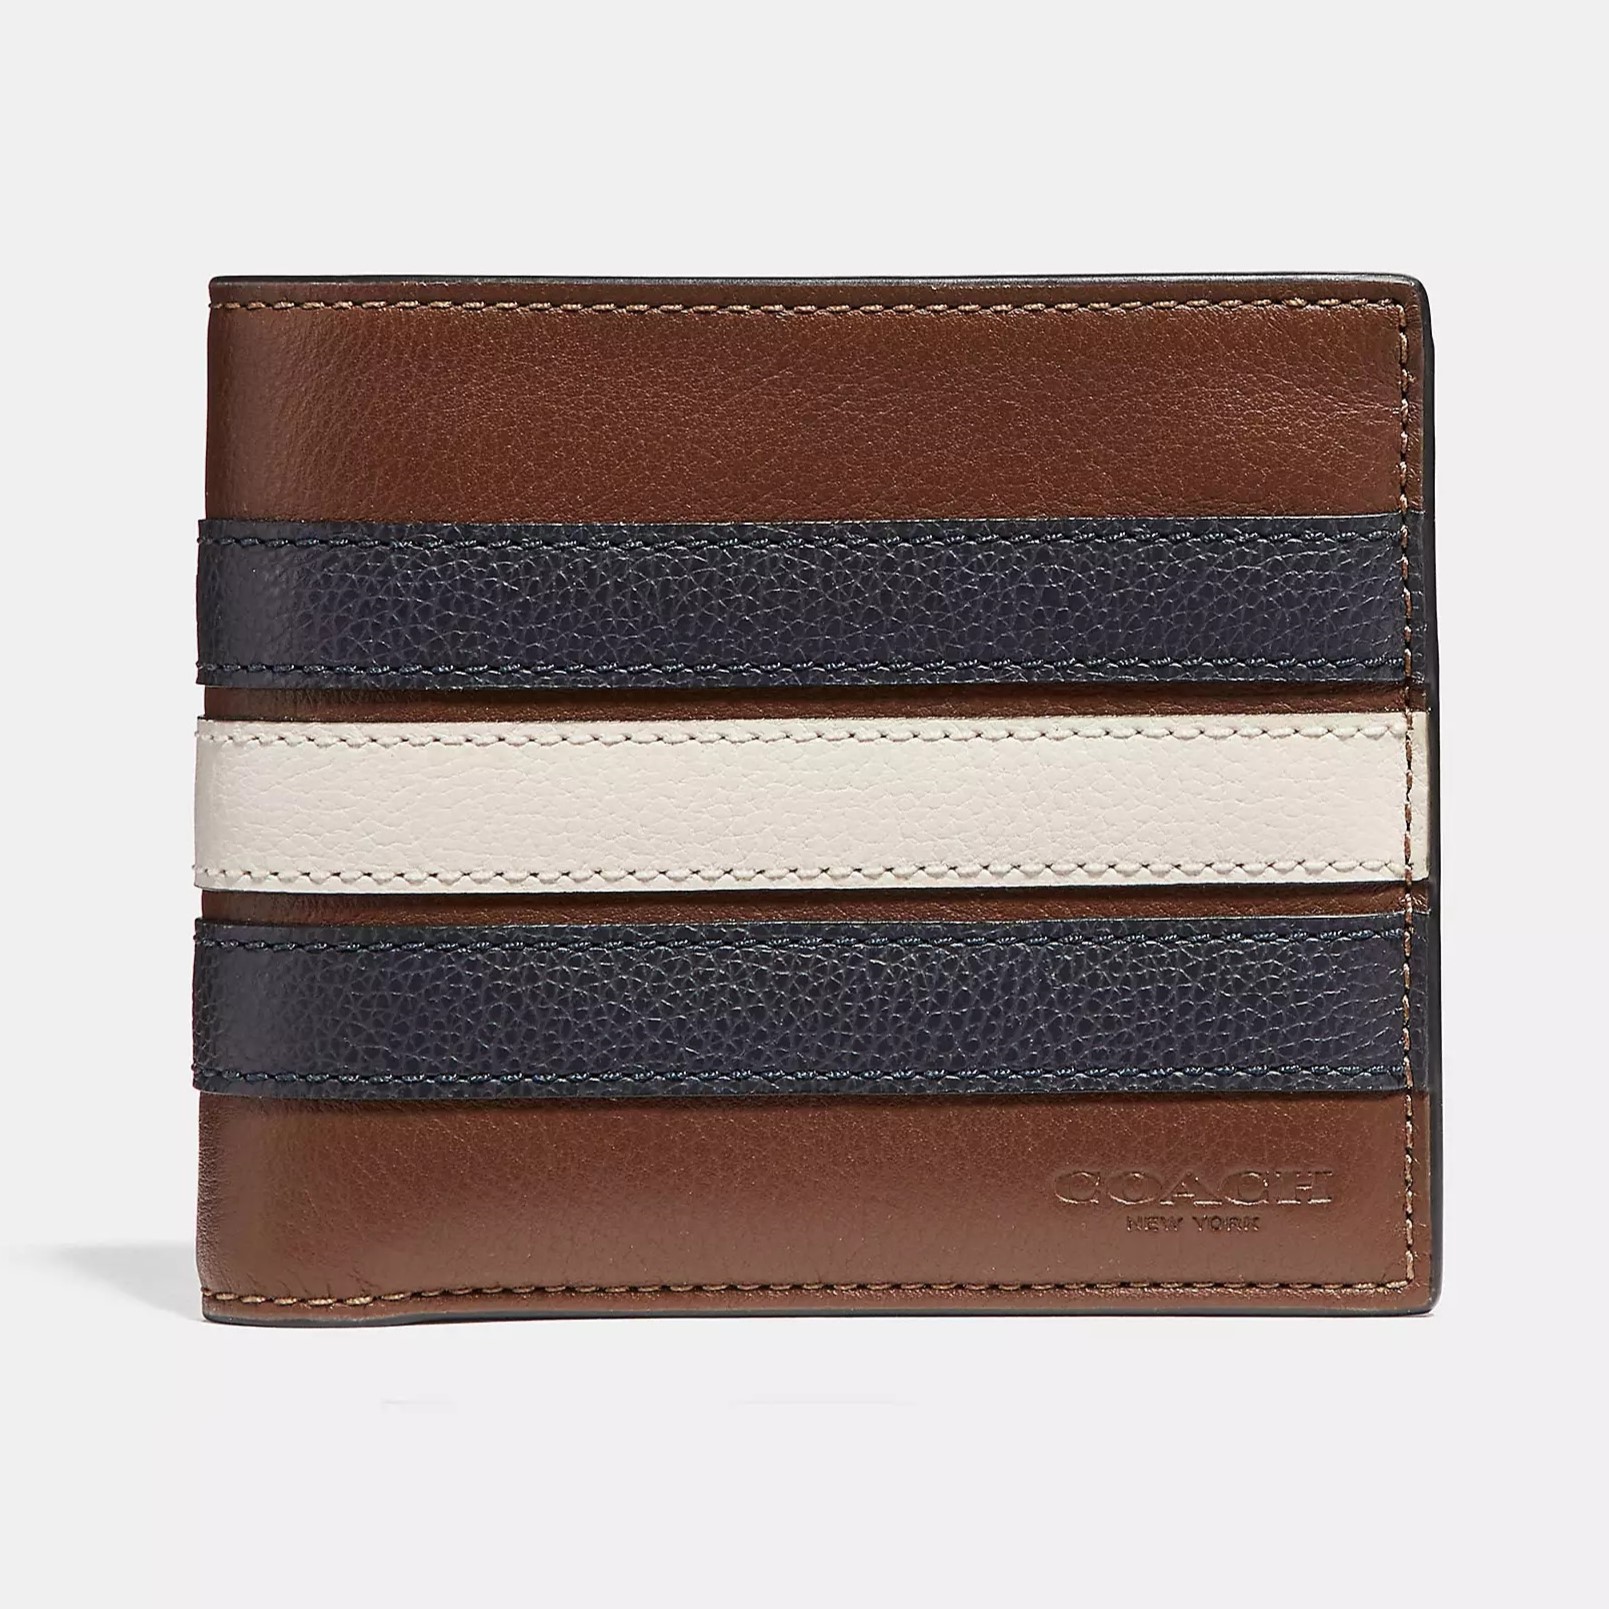 VÍ COACH NAM NÂU SỌC GIỮA 3 IN 1 WALLET WITH VARSITY STRIPE SMOOTH CALF LEATHER F24649 2